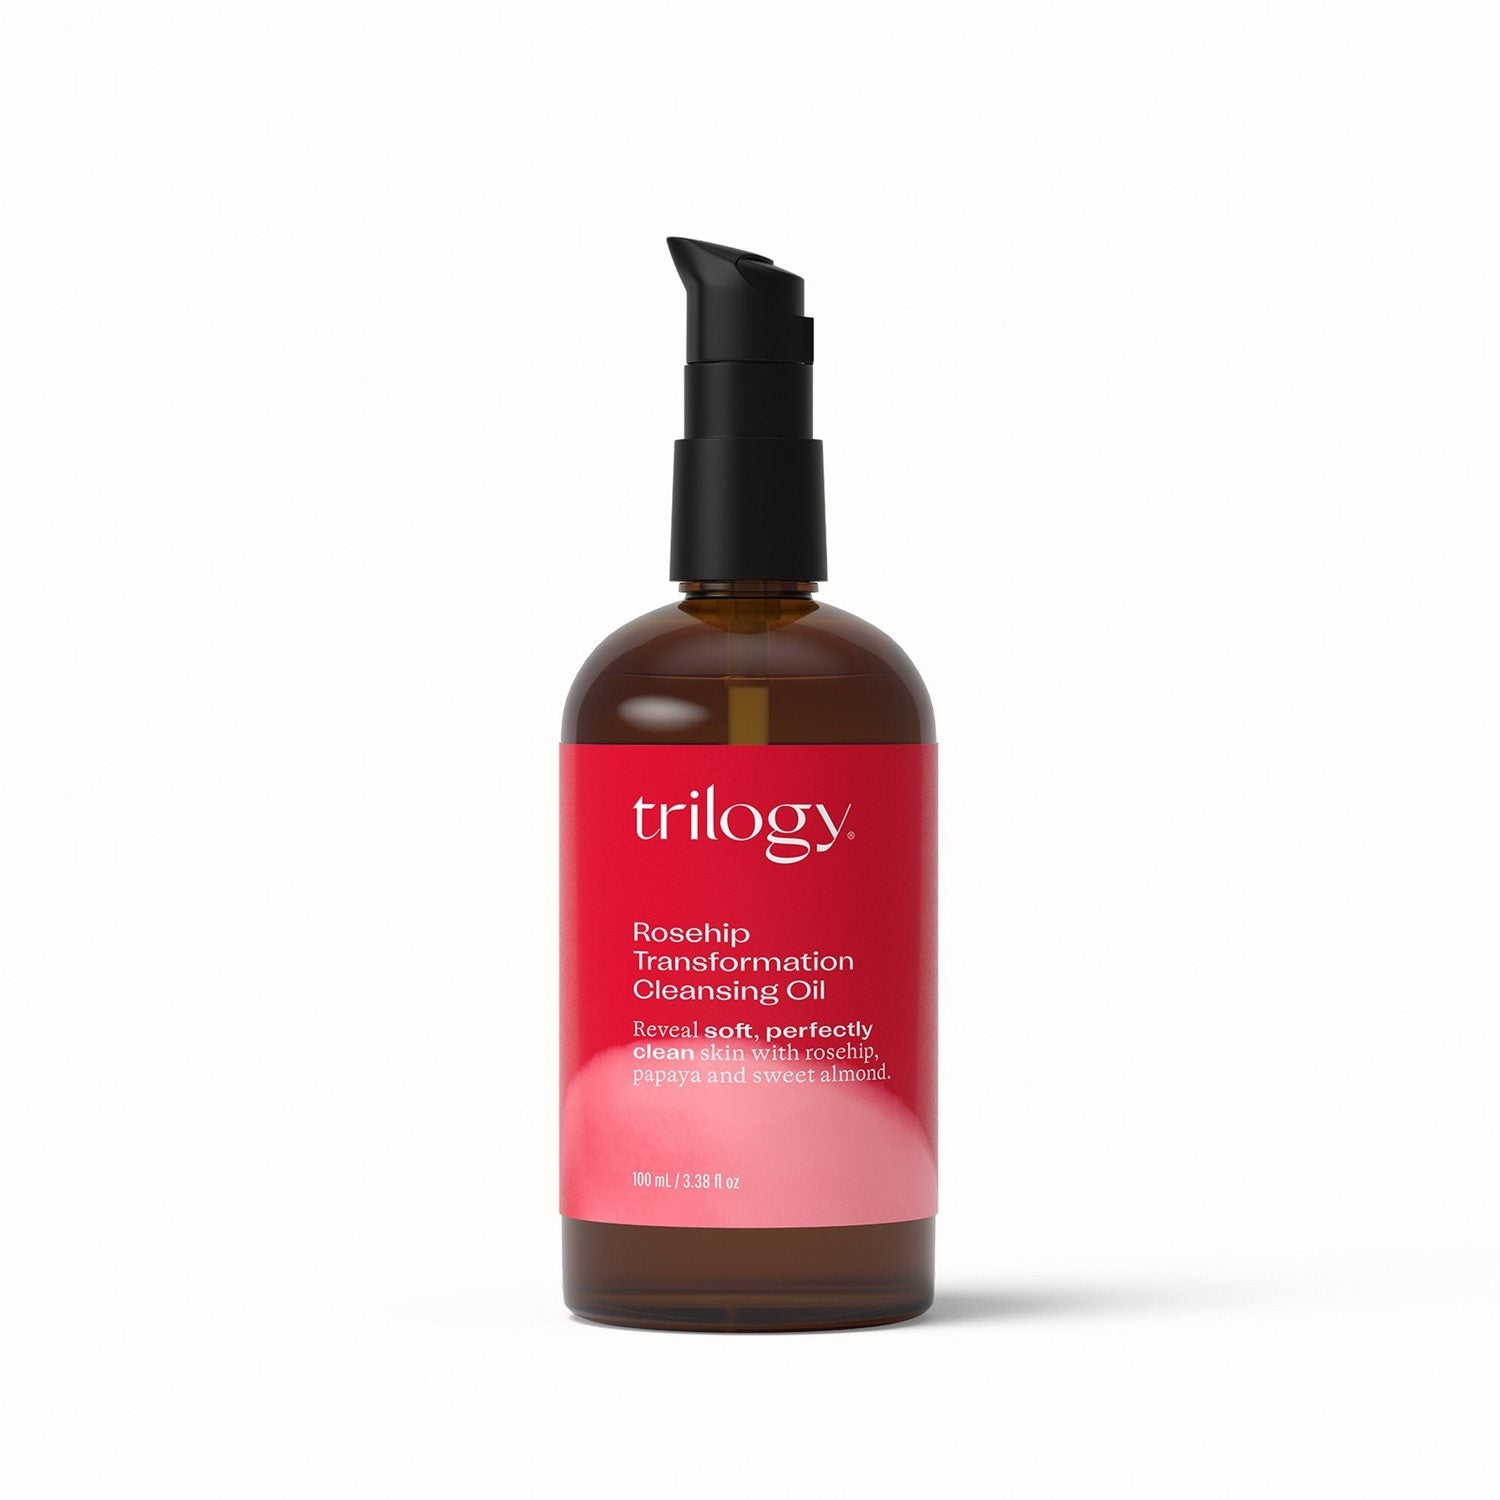 Trilogy Rosehip Transformation Cleansing Oil 100ml.